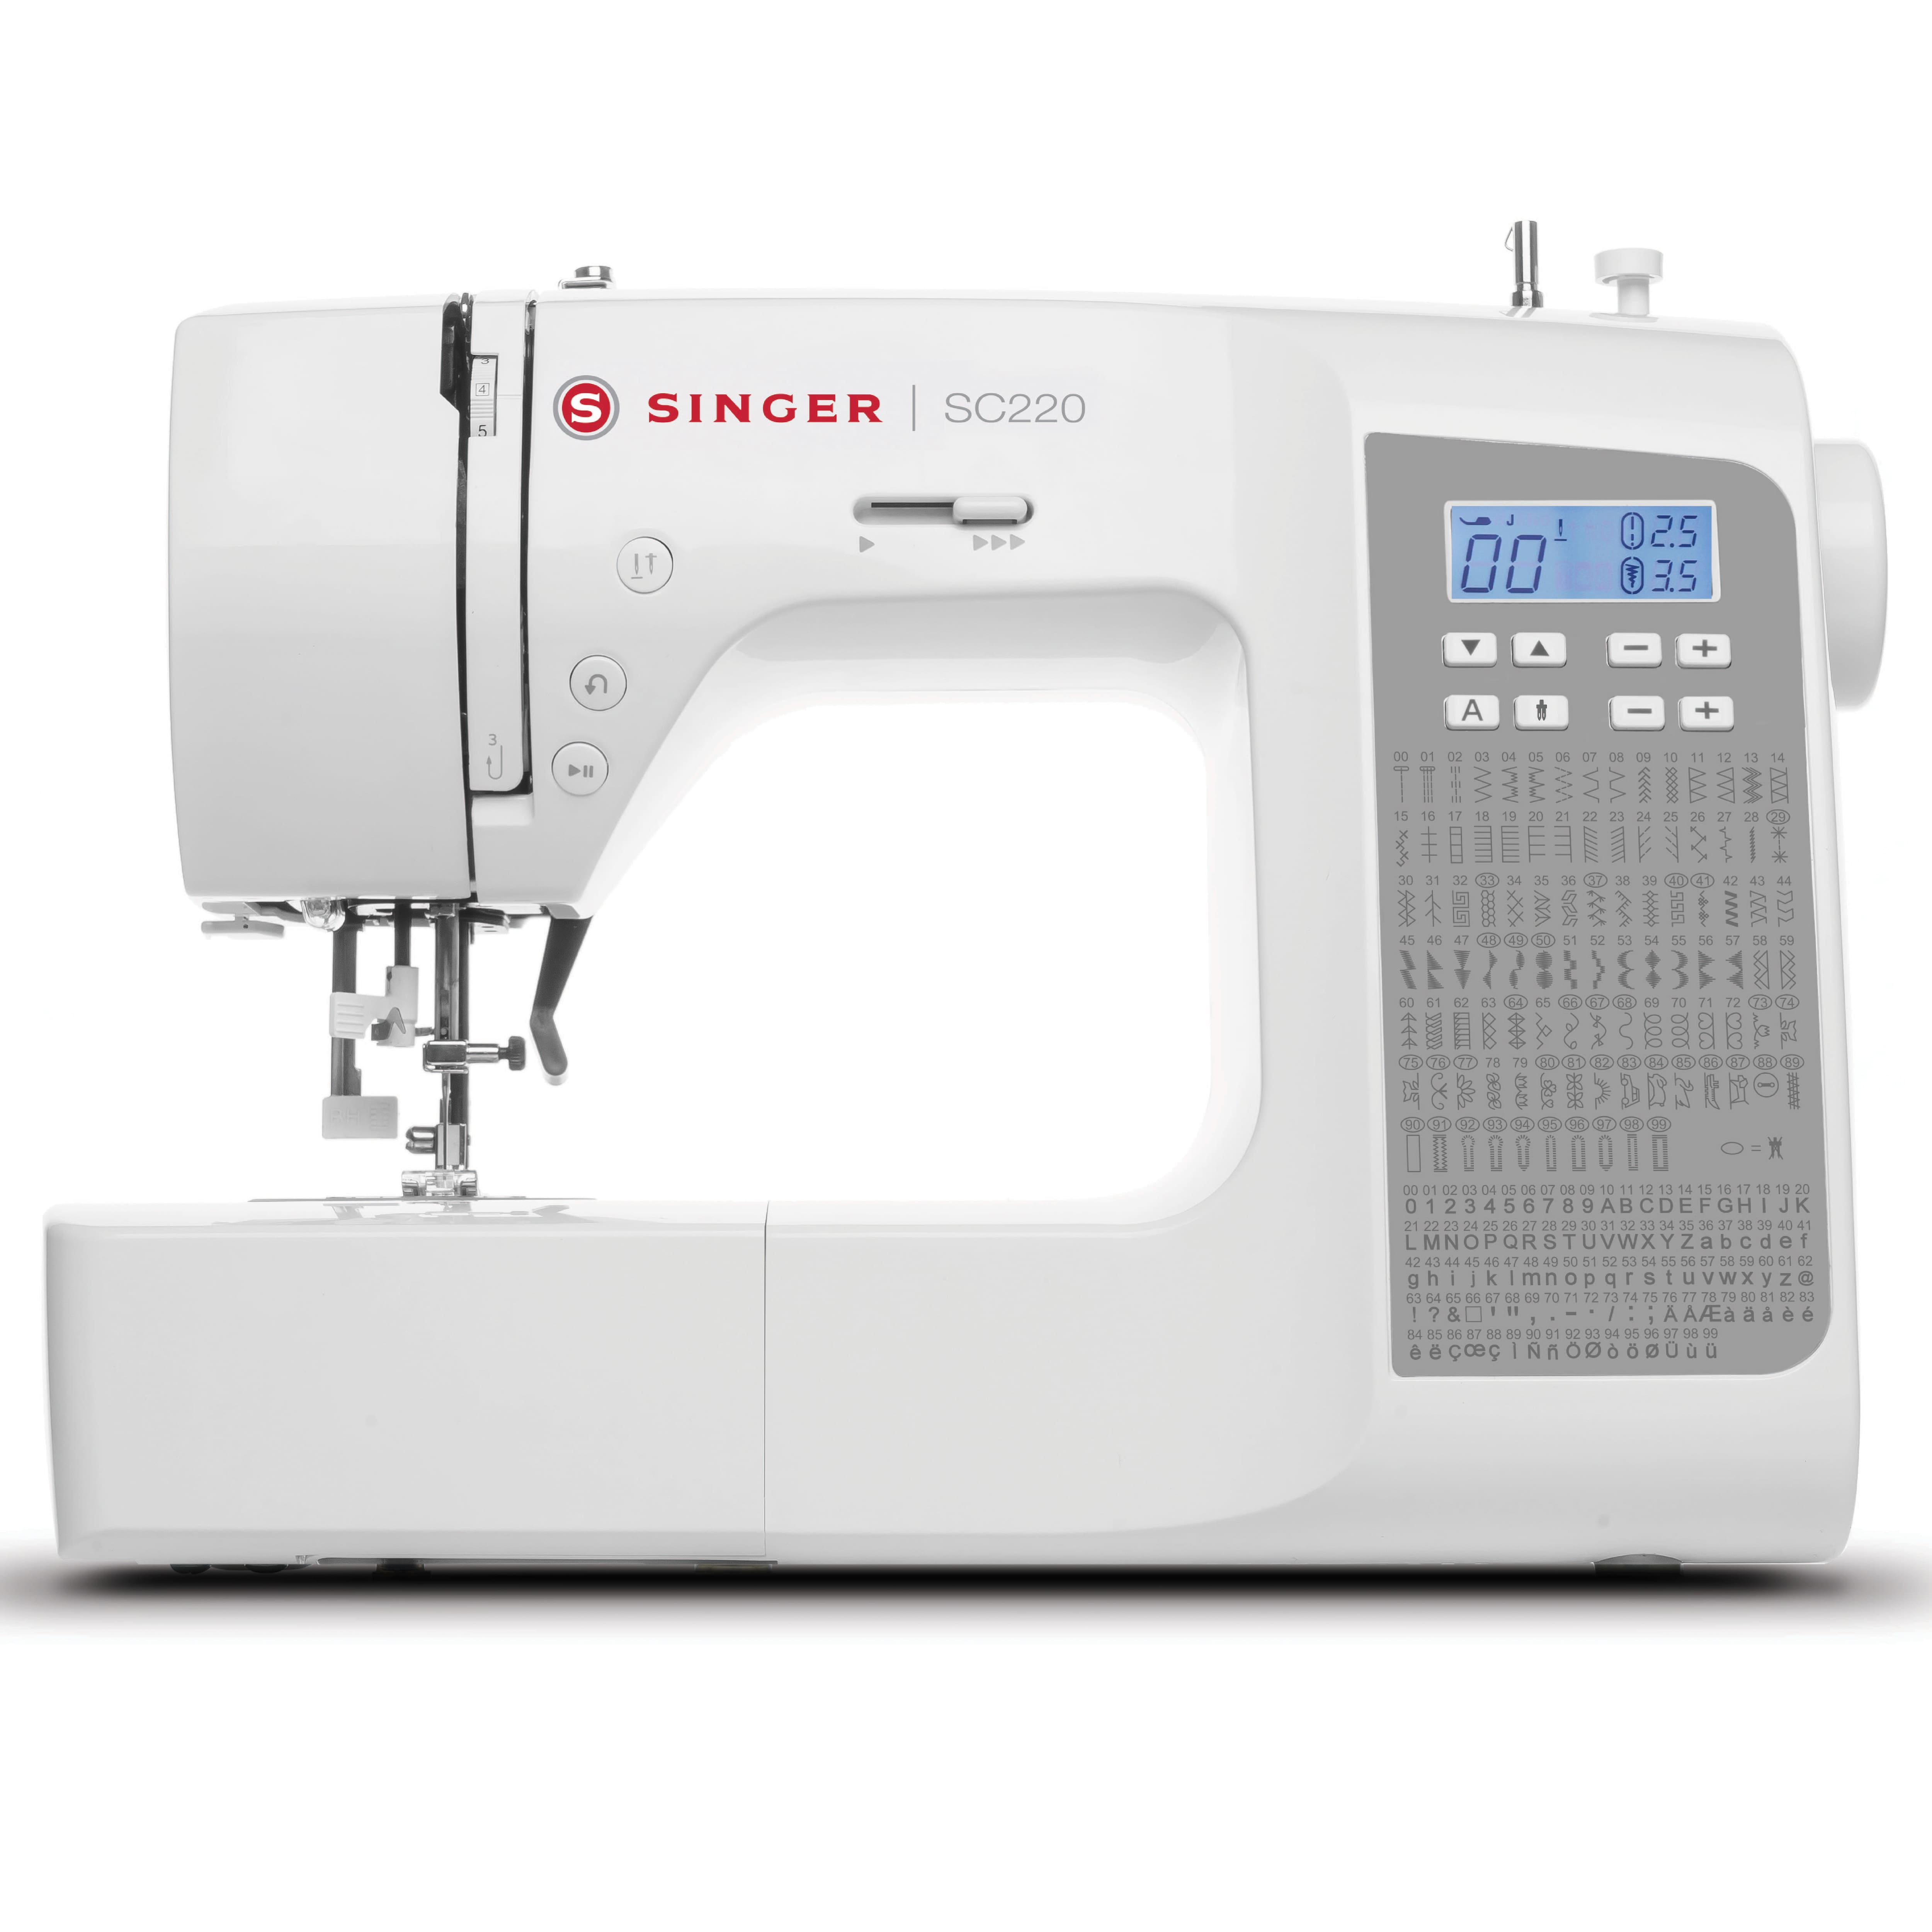 Singer Company, Sewing Machines, Textiles & Manufacturing